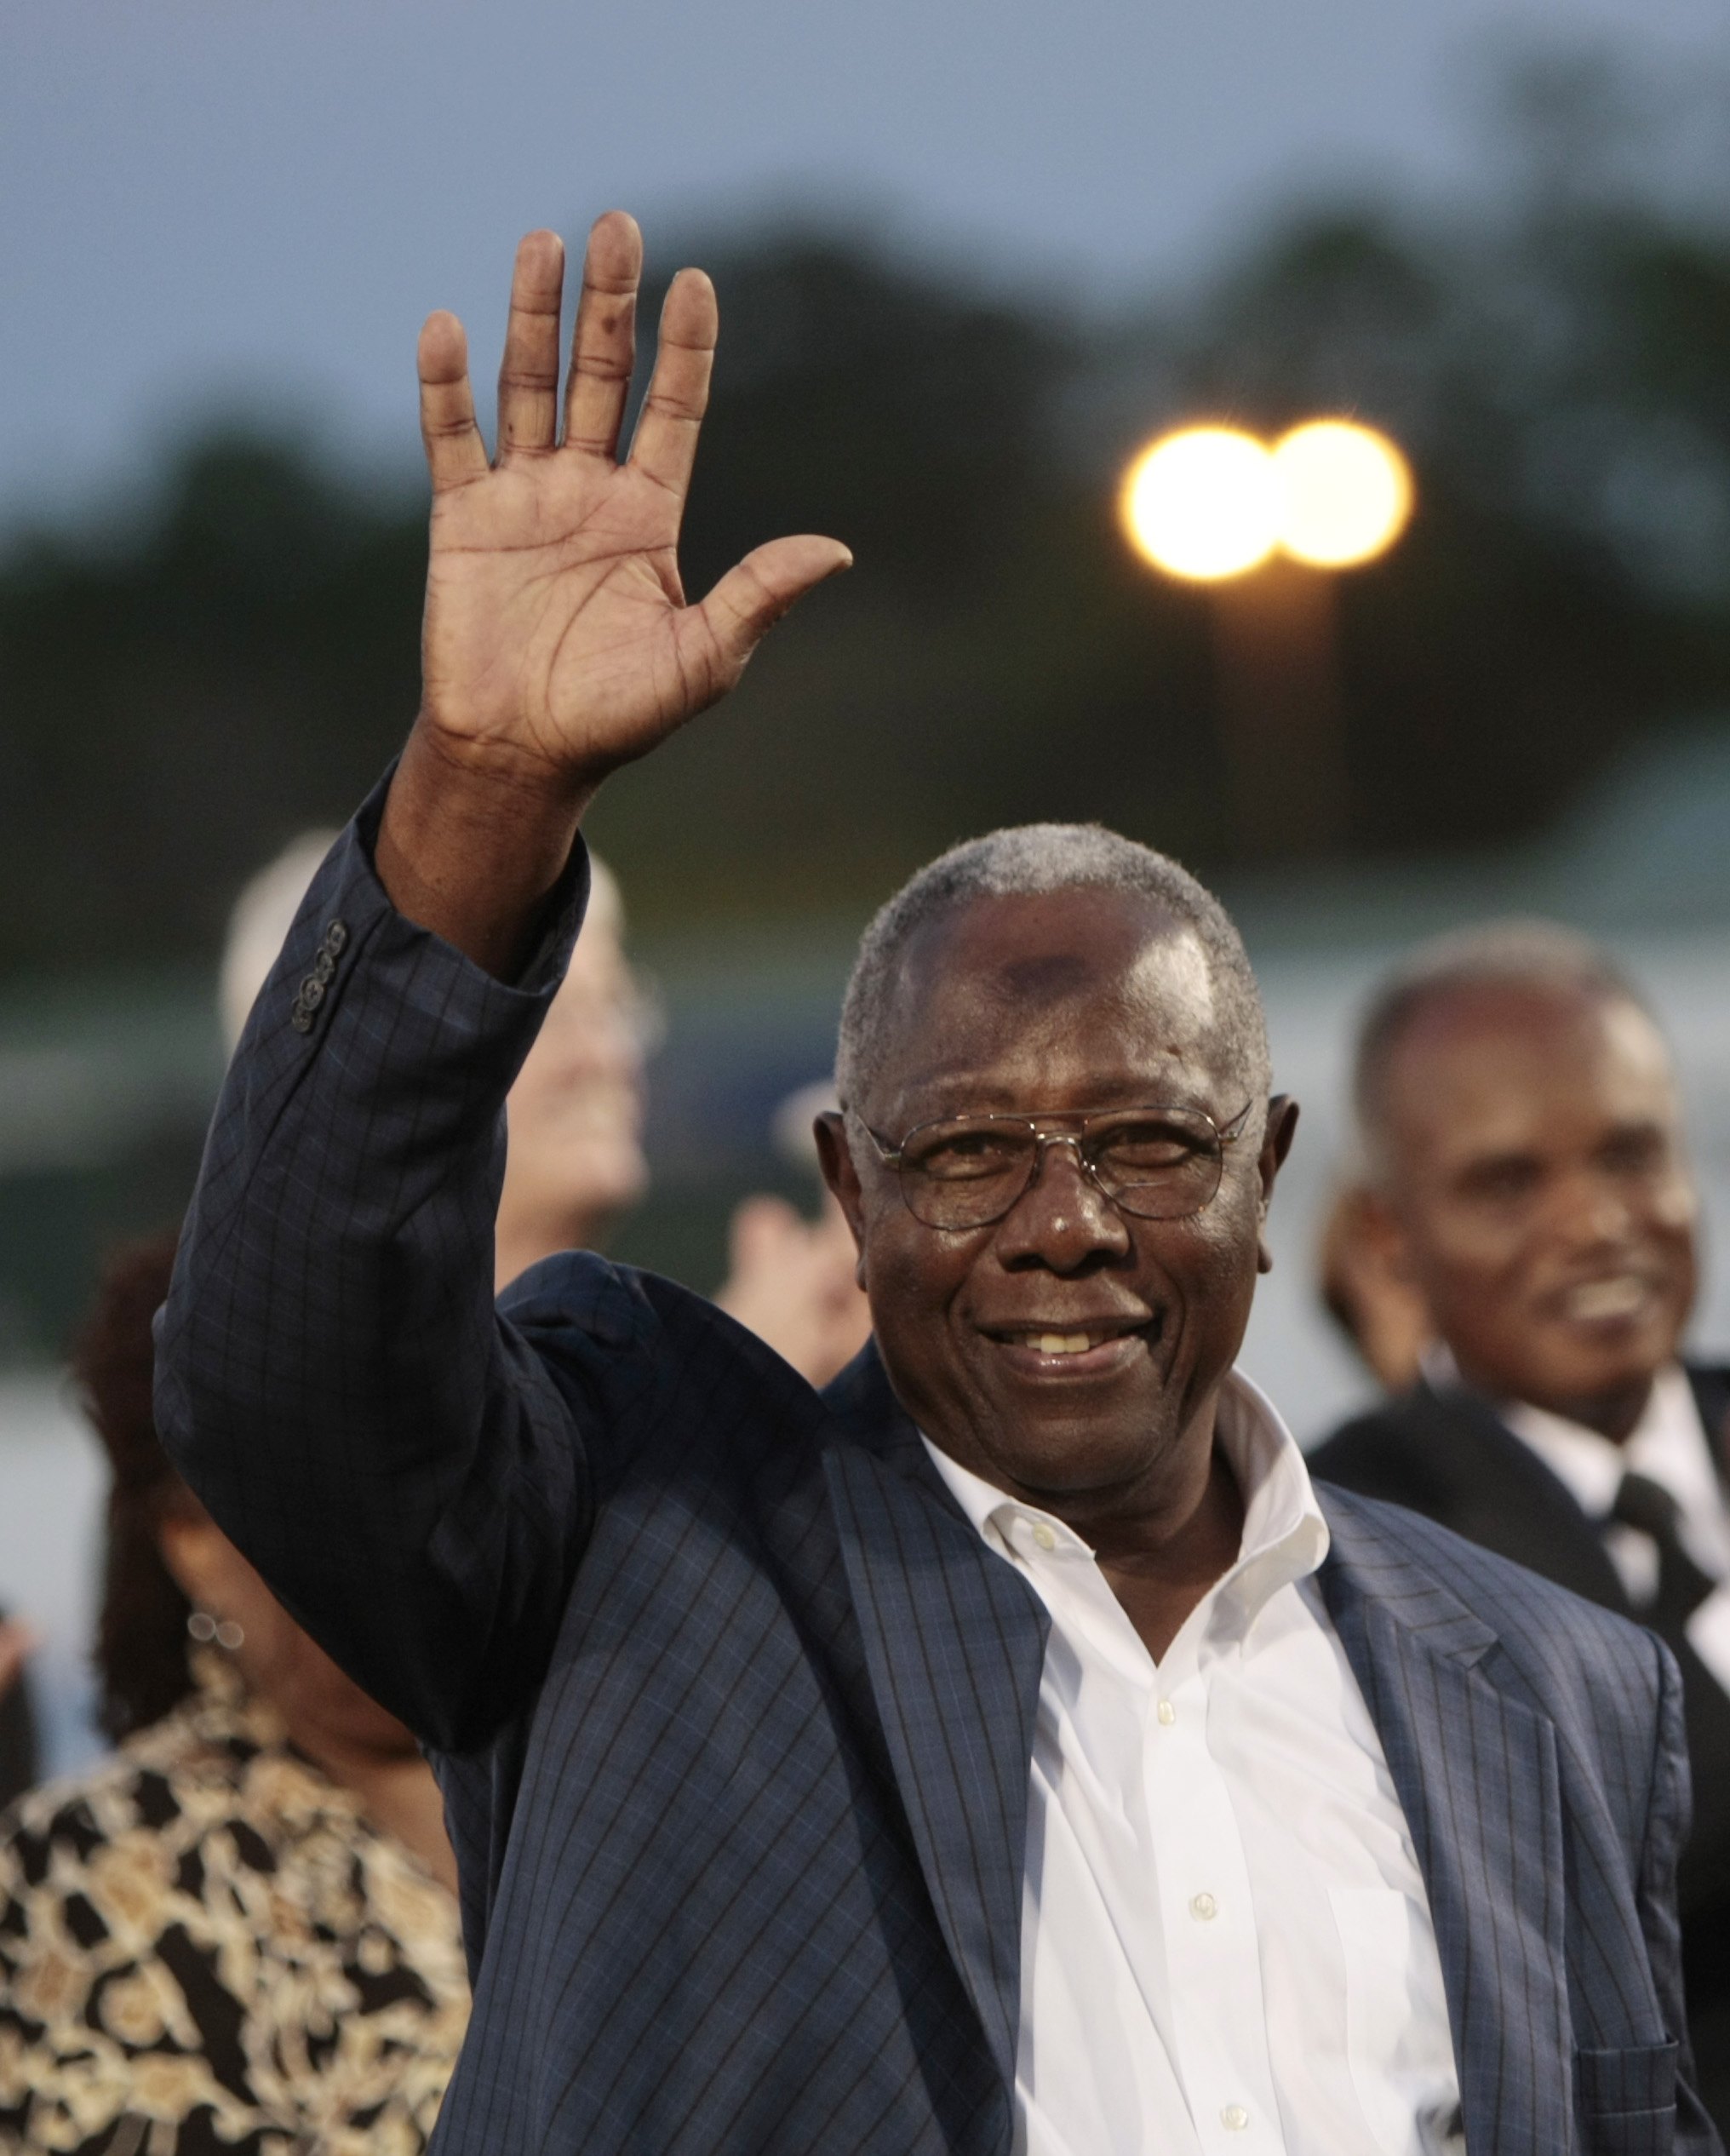 MOBILE, AL - APRIL 14: MLB Hall of Famer Hank Aaron waves to fans during pre-game ceremonies following the opening the Hank Aaron Museum at the Hank Aaron Stadium on April 14, 2010 in Mobile, Alabama. (Photo by Dave Martin/Getty Images)